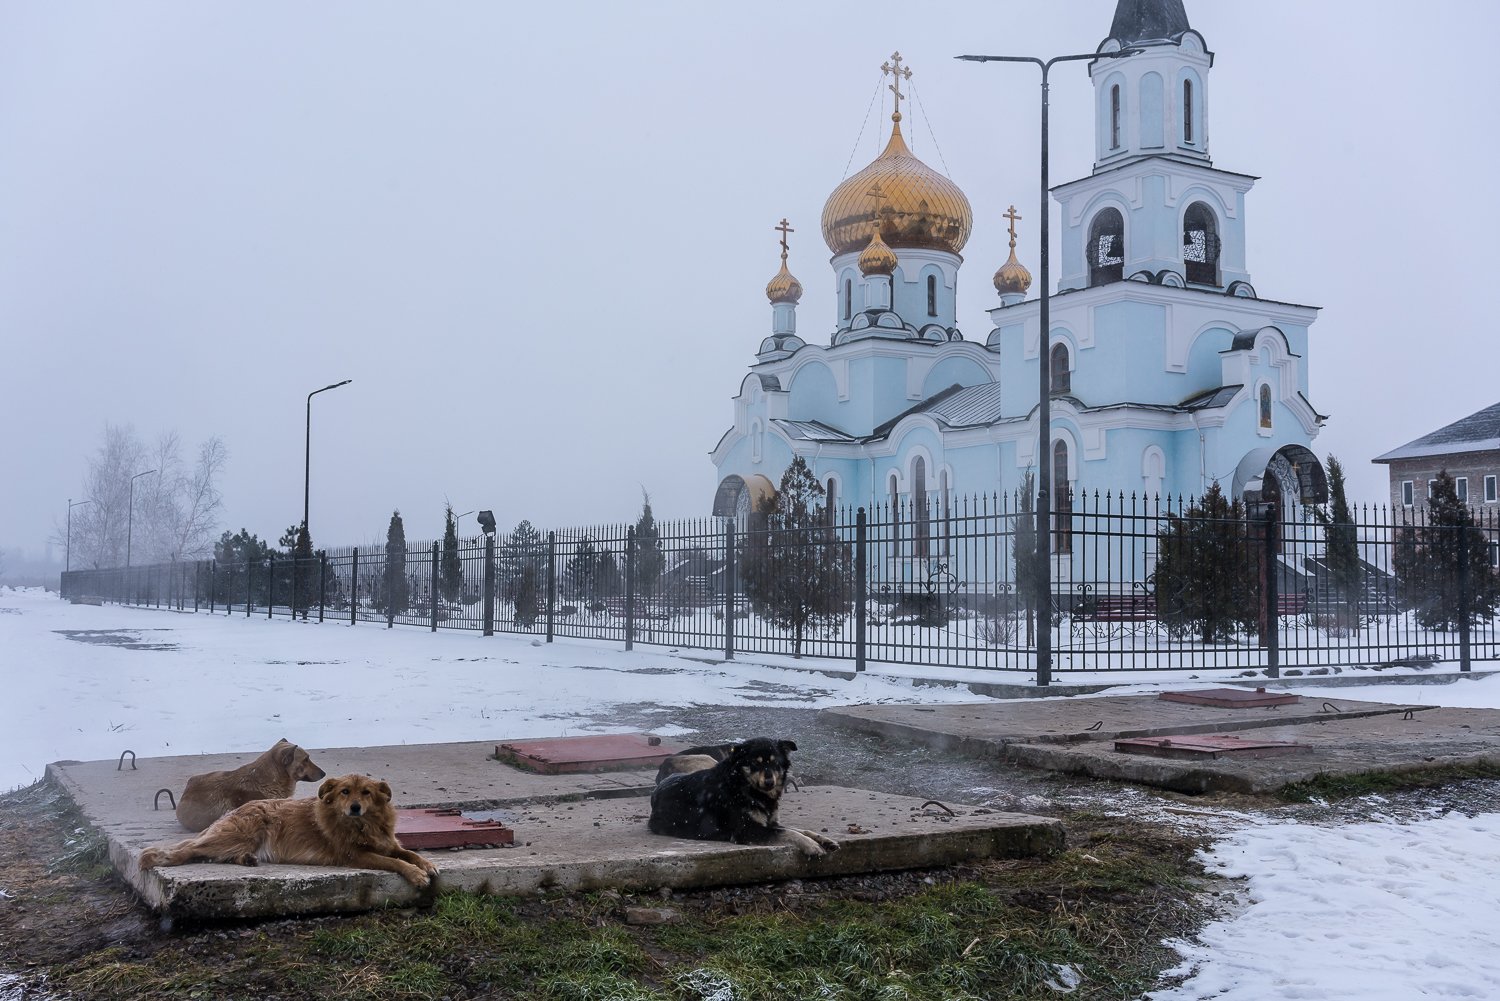  Stray dogs lie on a steam vent outside the Church of St. Mary Magdalene on Sunday, January 23, 2022 in Avdiivka, Ukraine. 